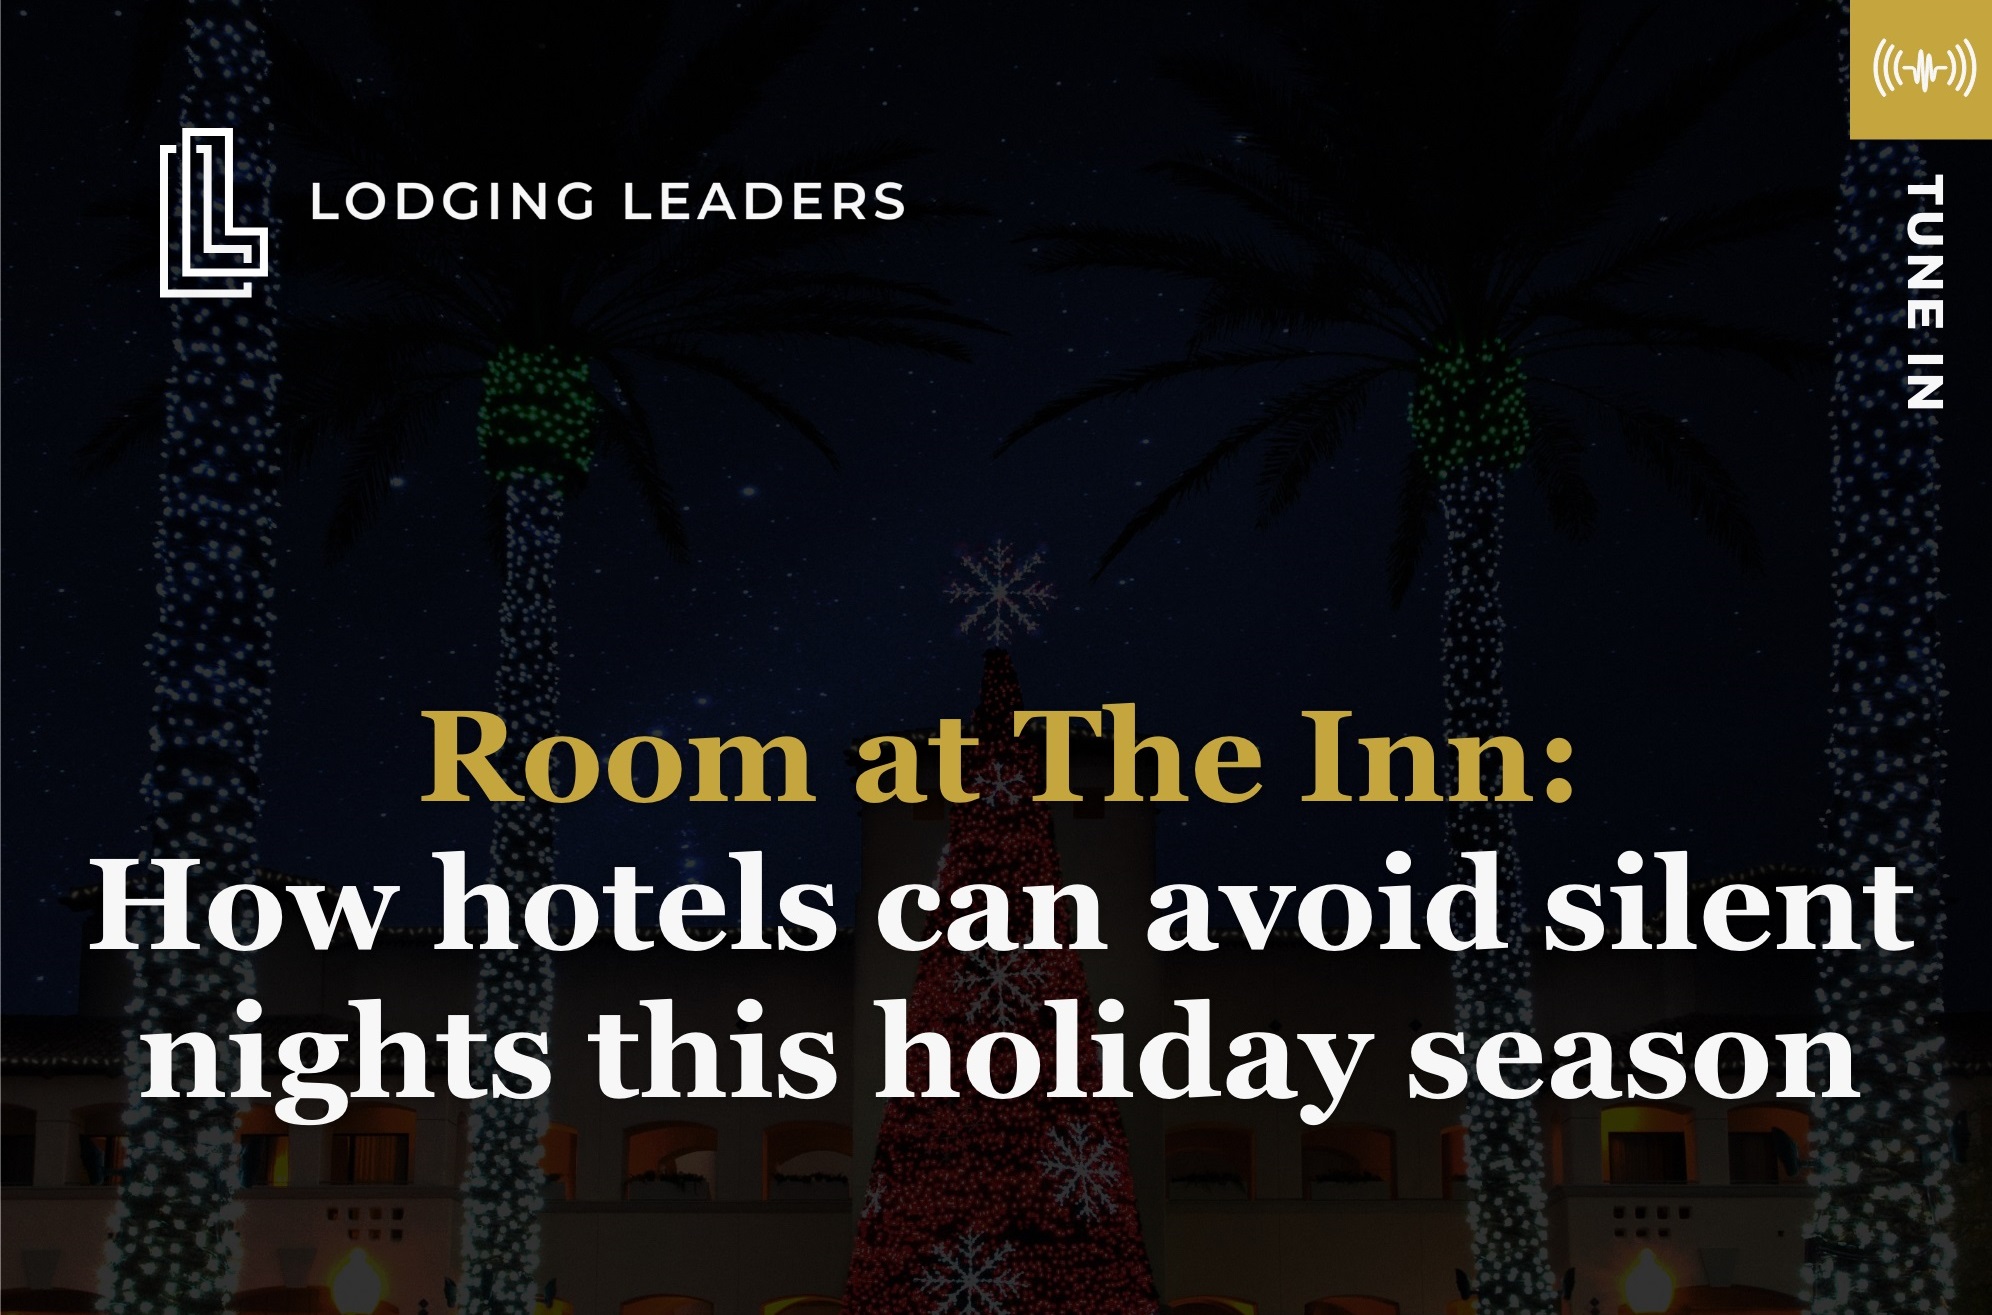 Podcast: How Hotels can Avoid Silent Nights this Holiday Season